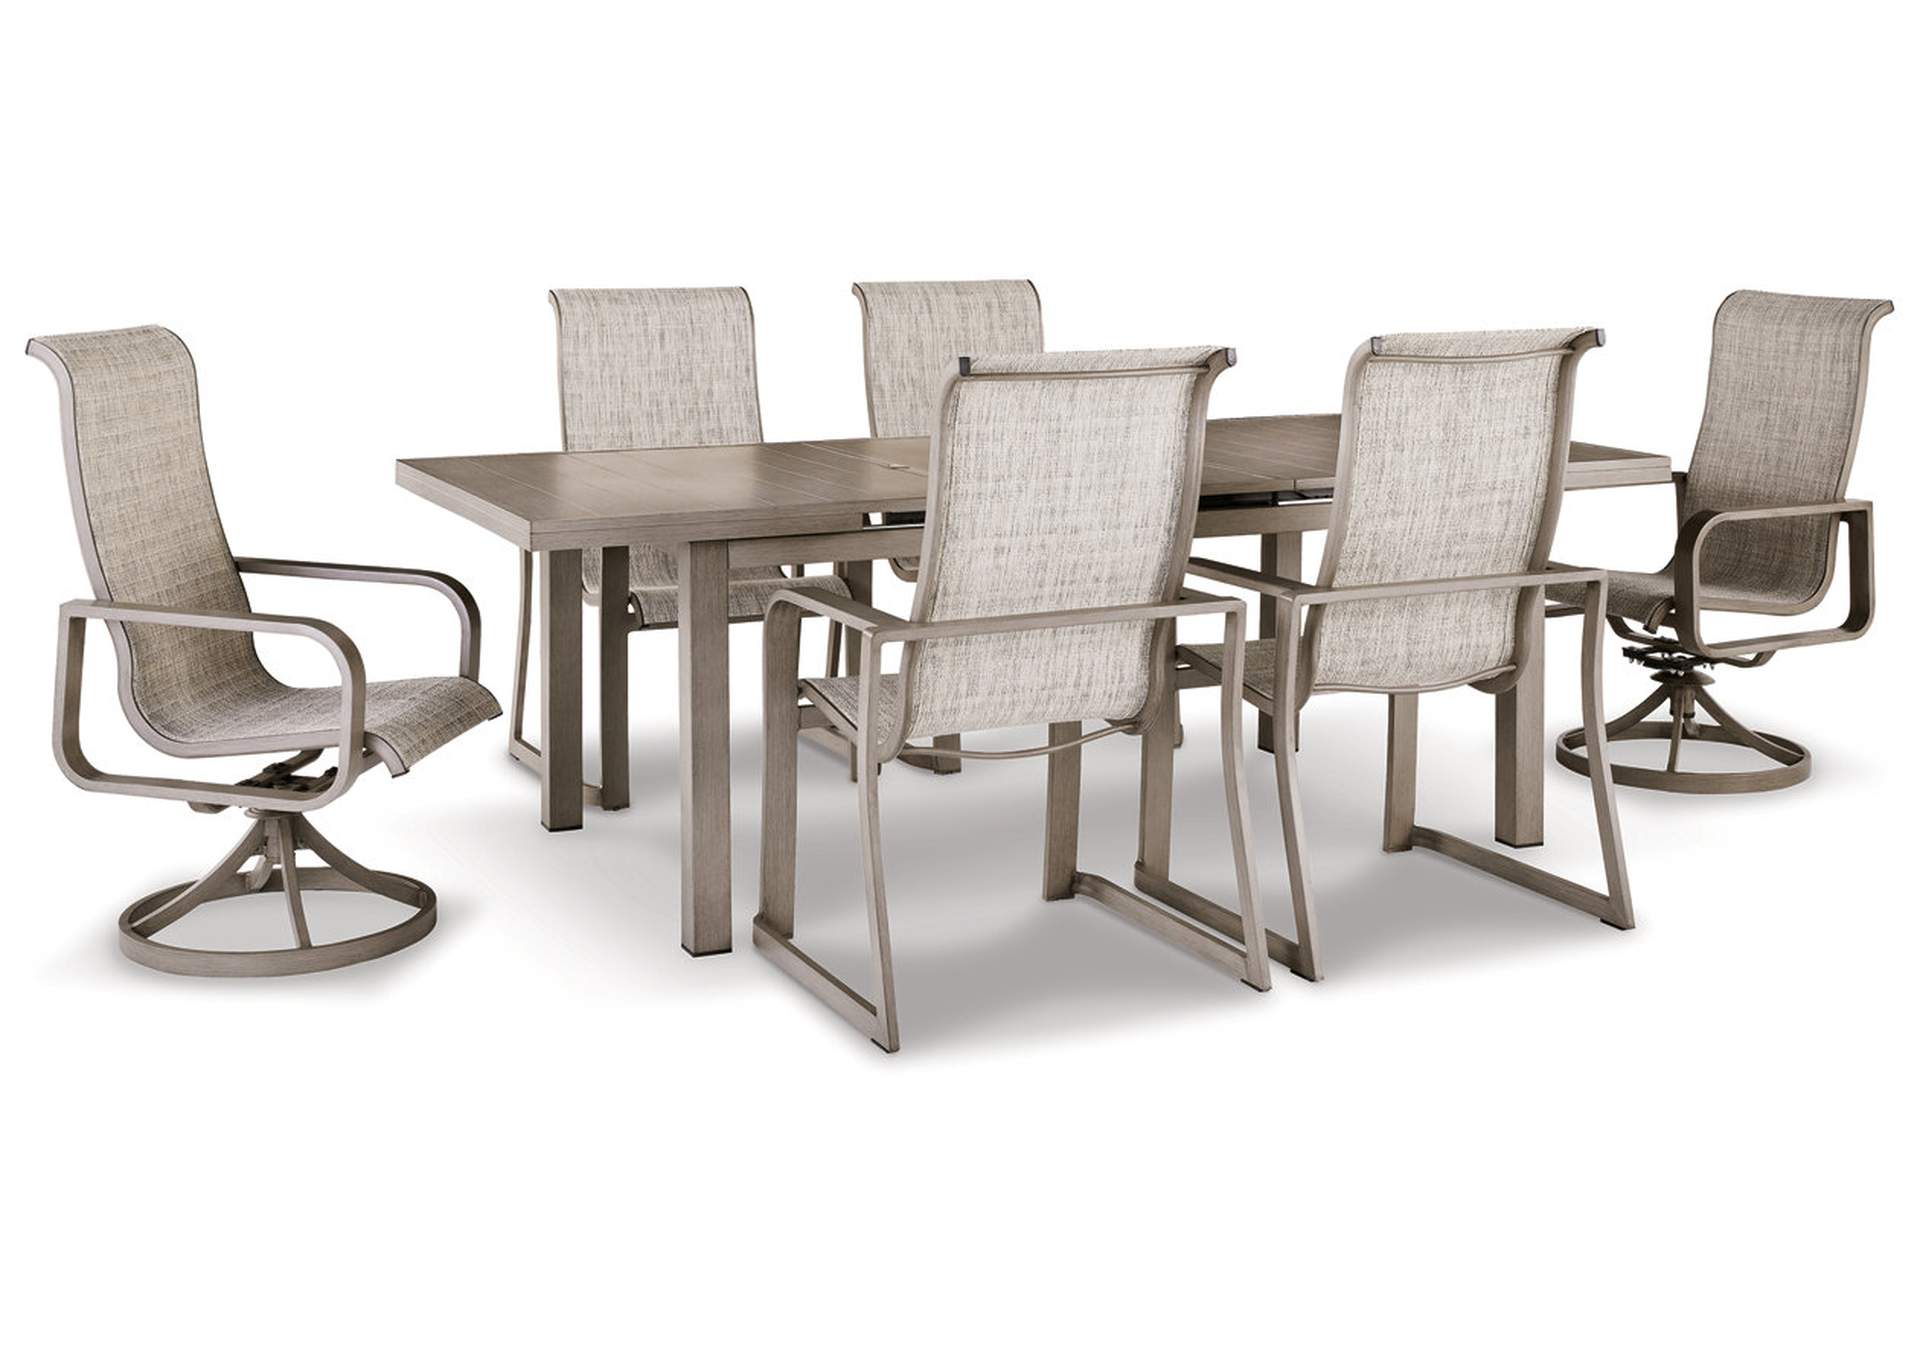 Beach Front Outdoor Dining Table and 6 Chairs